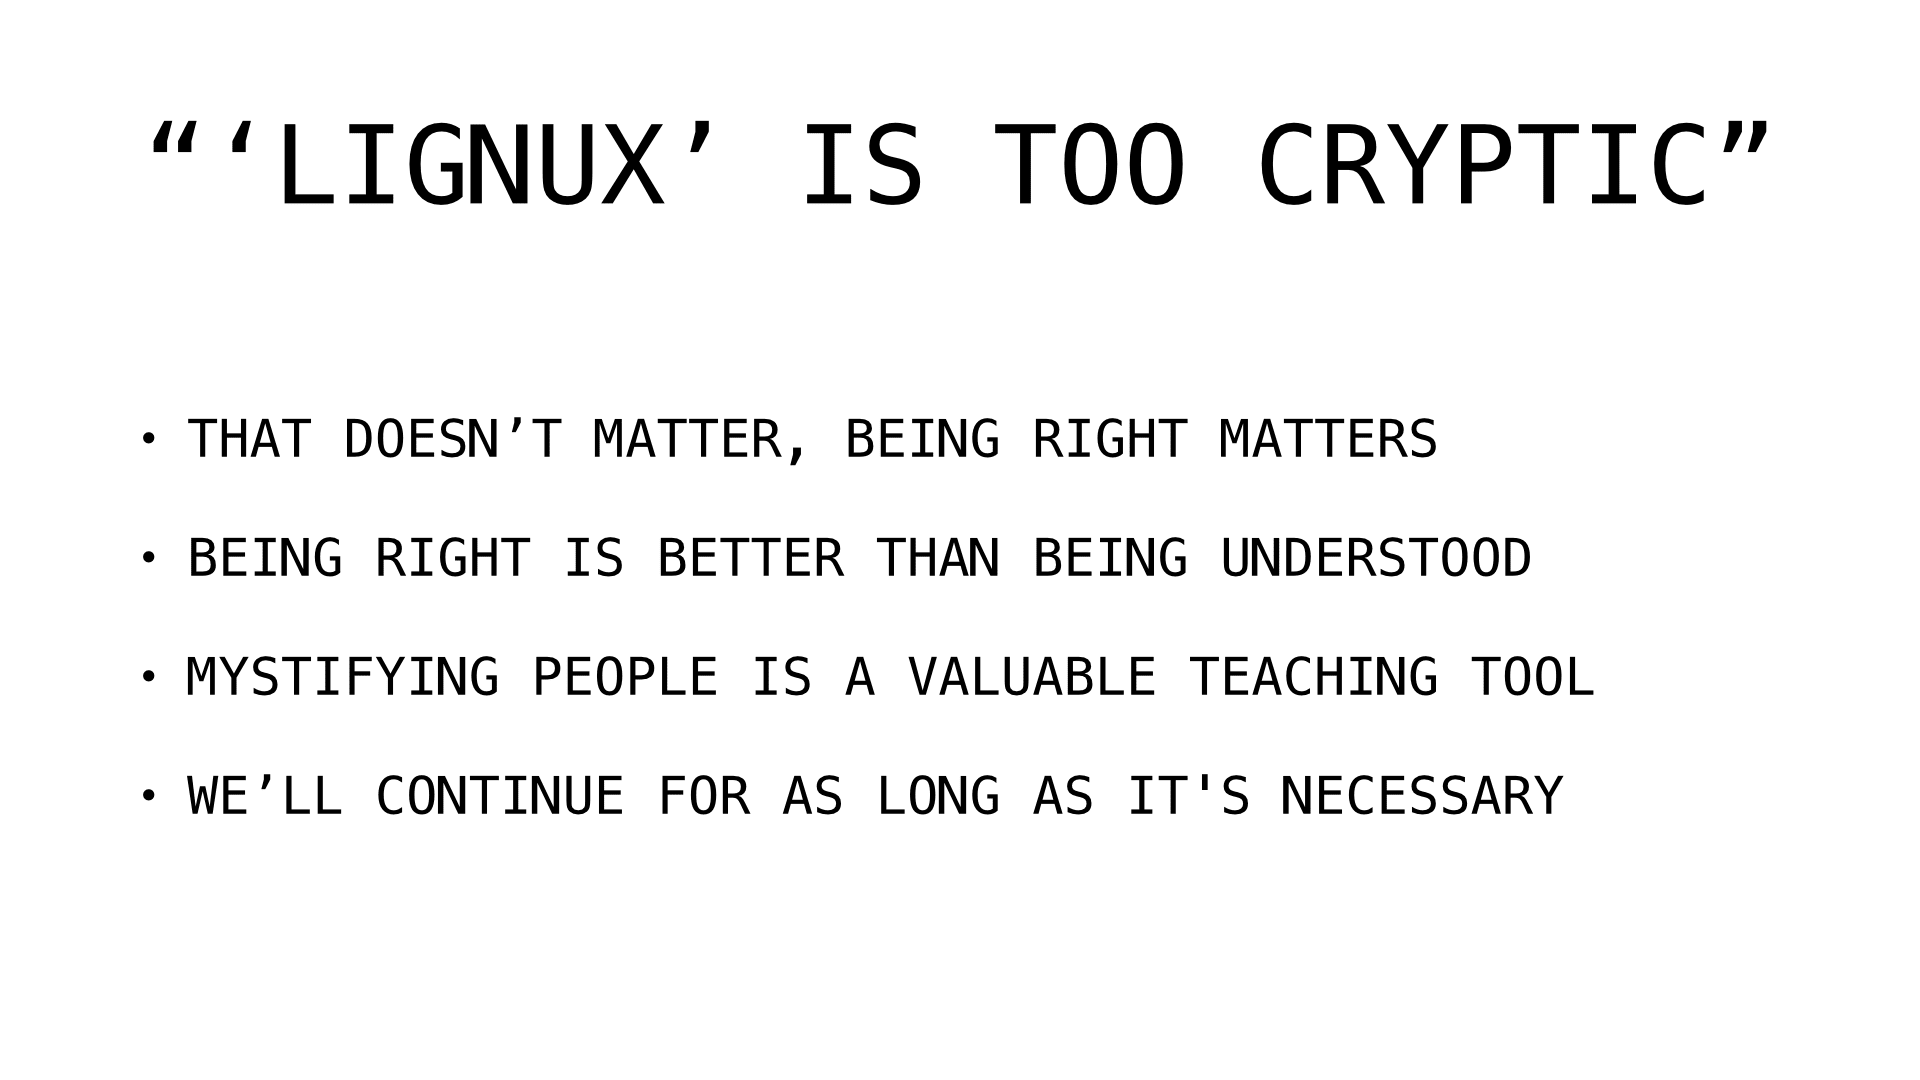 lignux is too cryptic